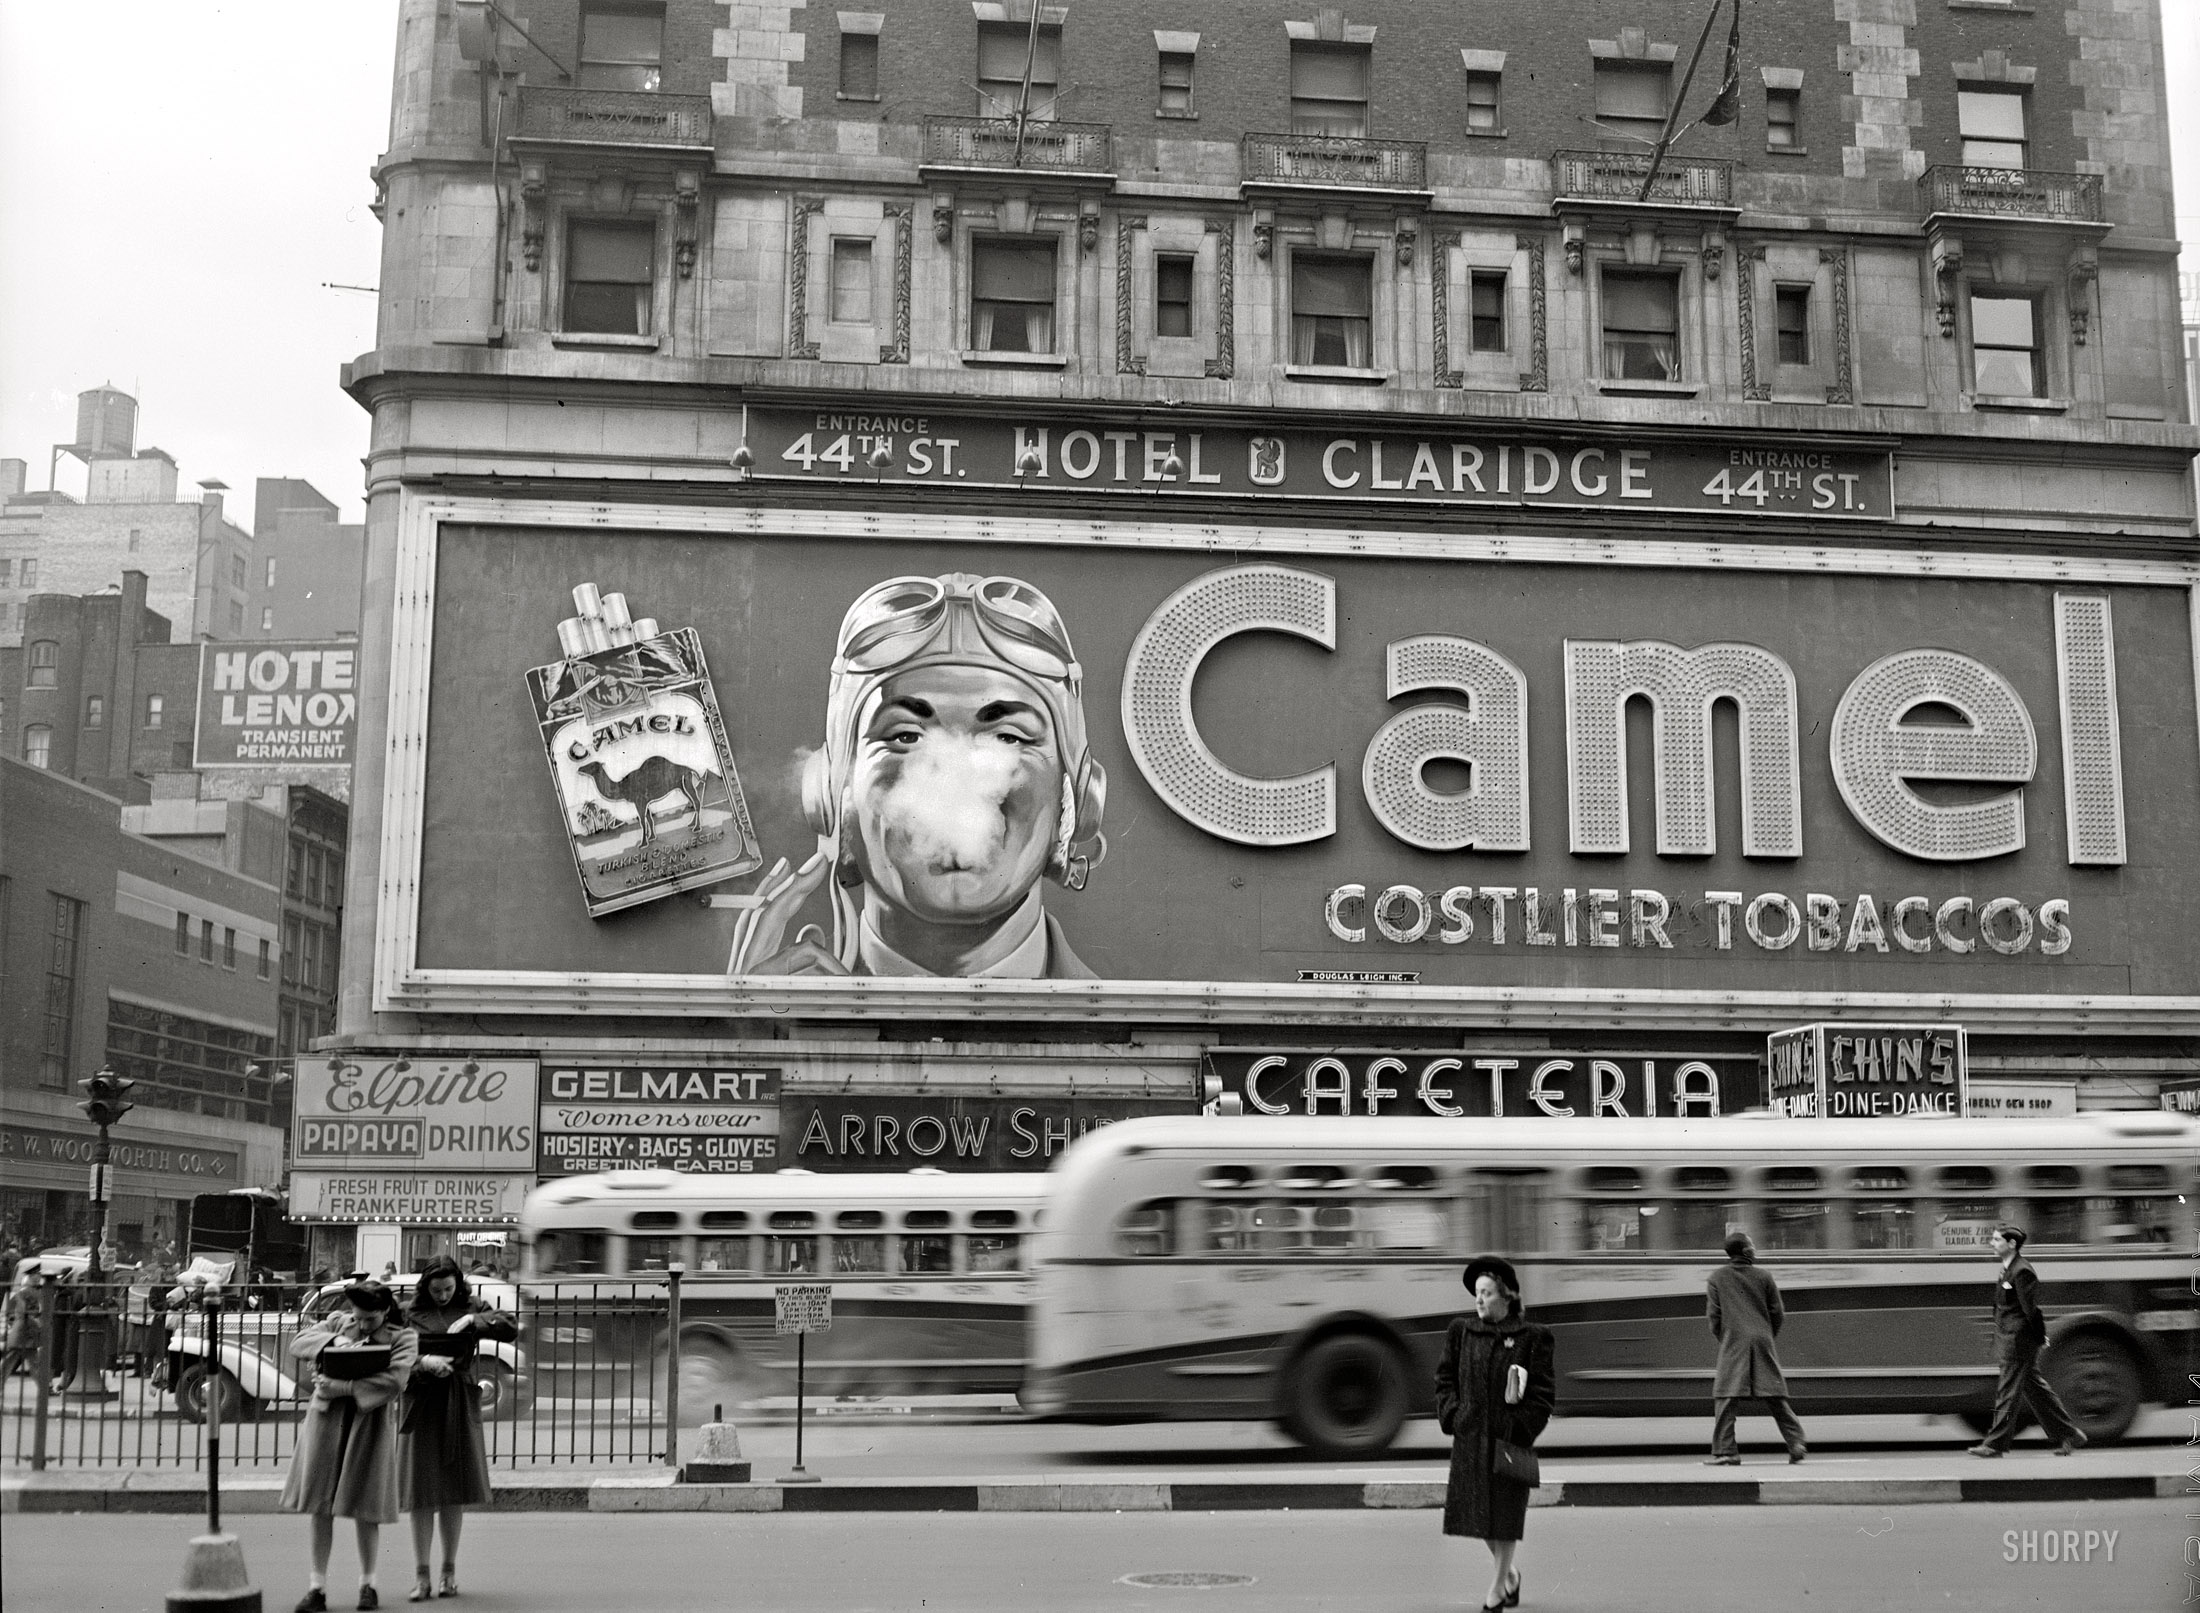 February 1943. "New York. Camel cigarette advertisement at Times Square." Photograph by John Vachon for the Office of War Information. View full size.